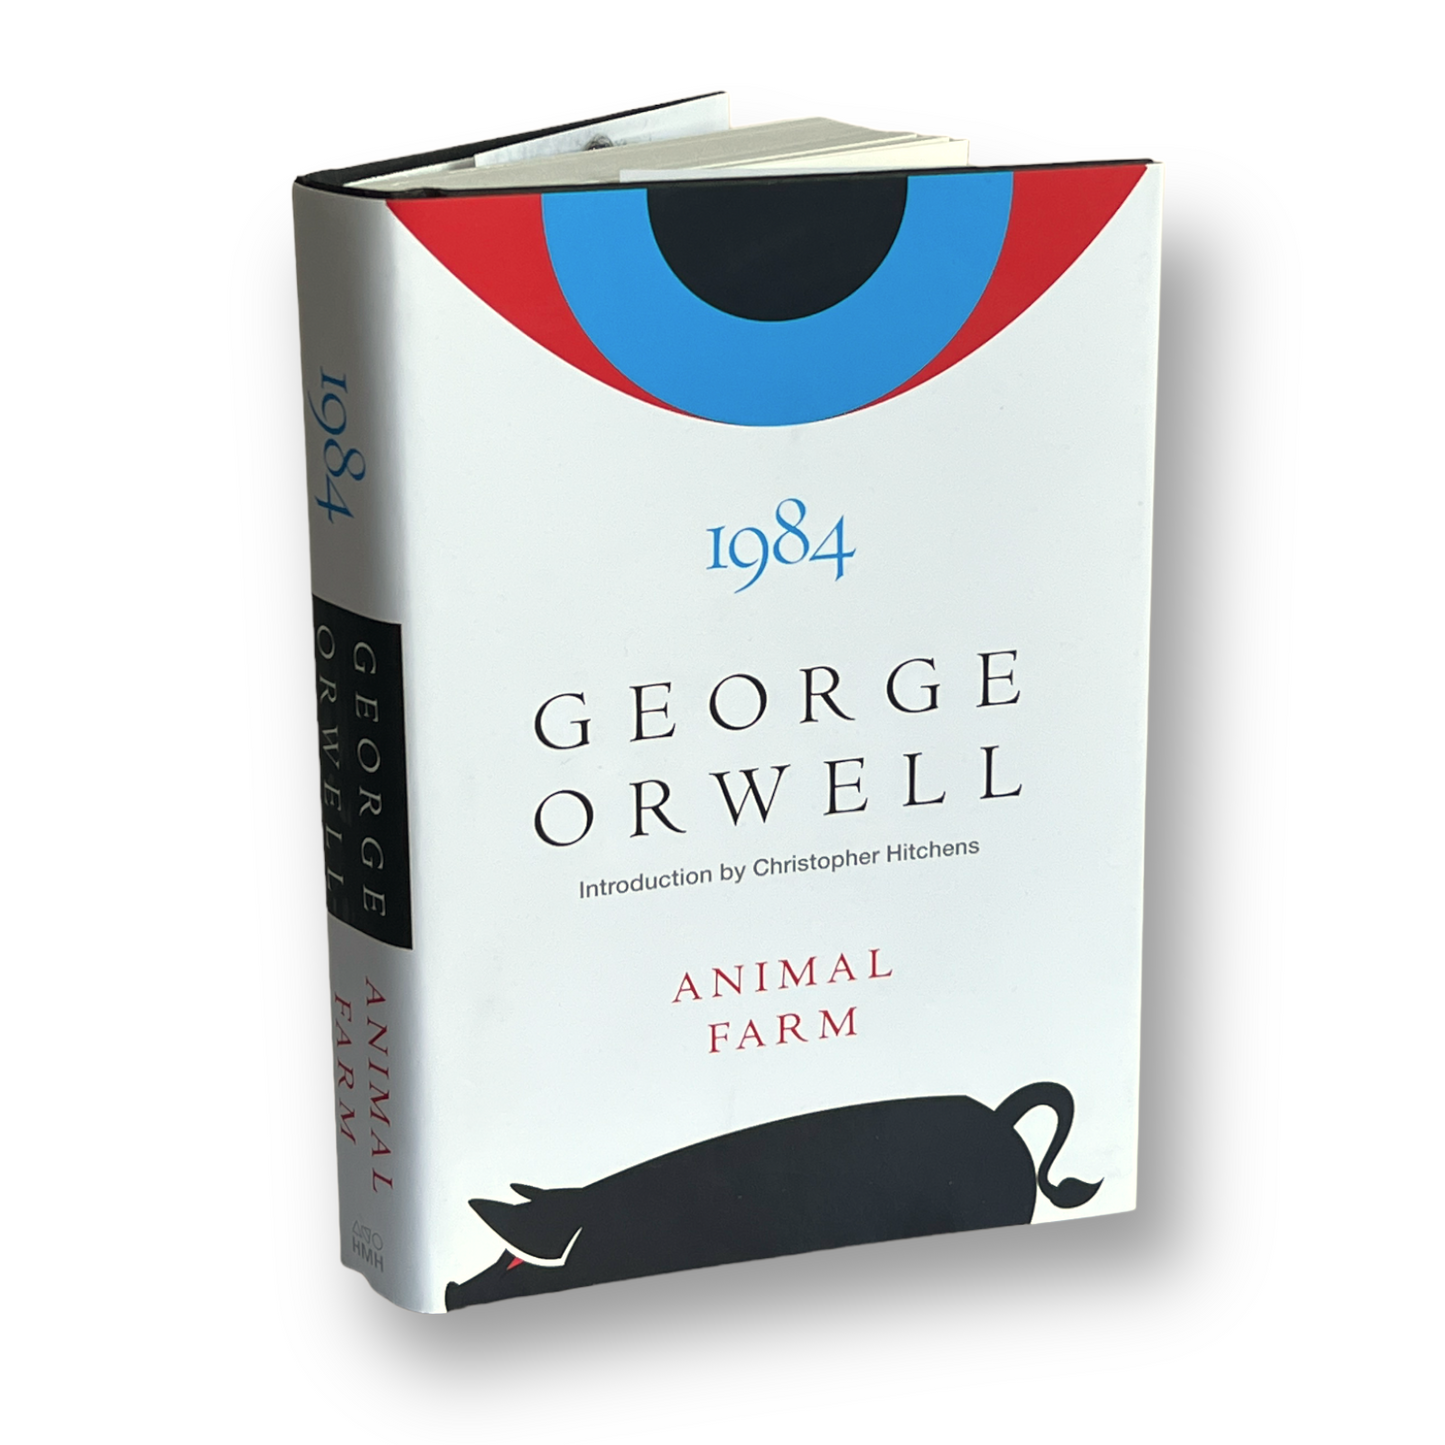 1984 Nineteen Eighty-Four & Animal Farm by GEORGE ORWELL - Collectible Special Deluxe Edition - Hardcover - Best Seller - Classic Book